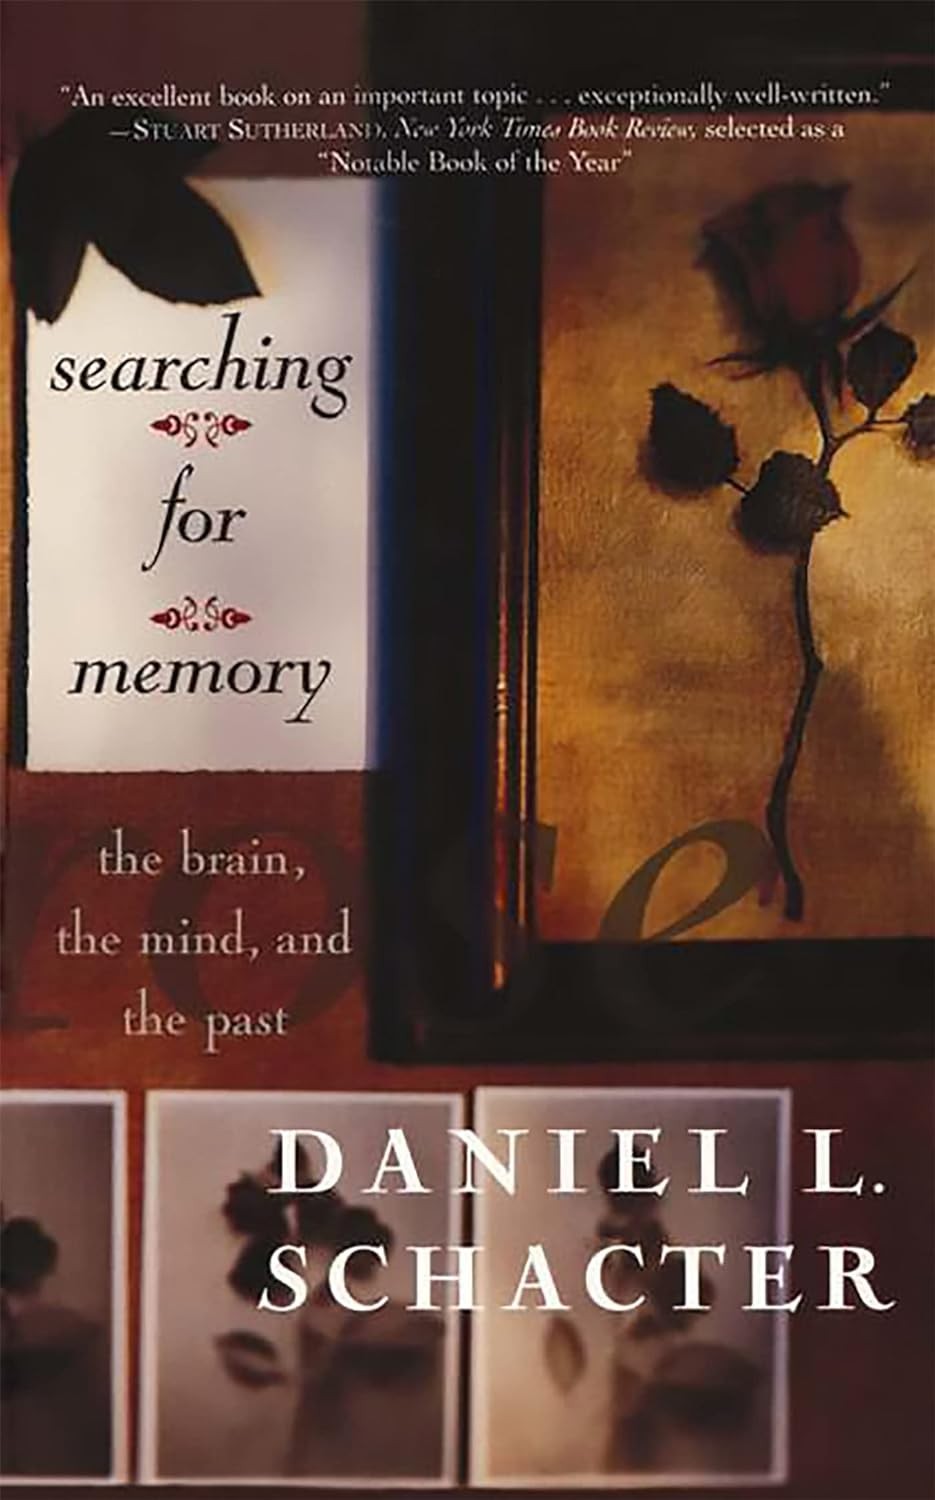 Searching for memory: The brain, the mind, and the past